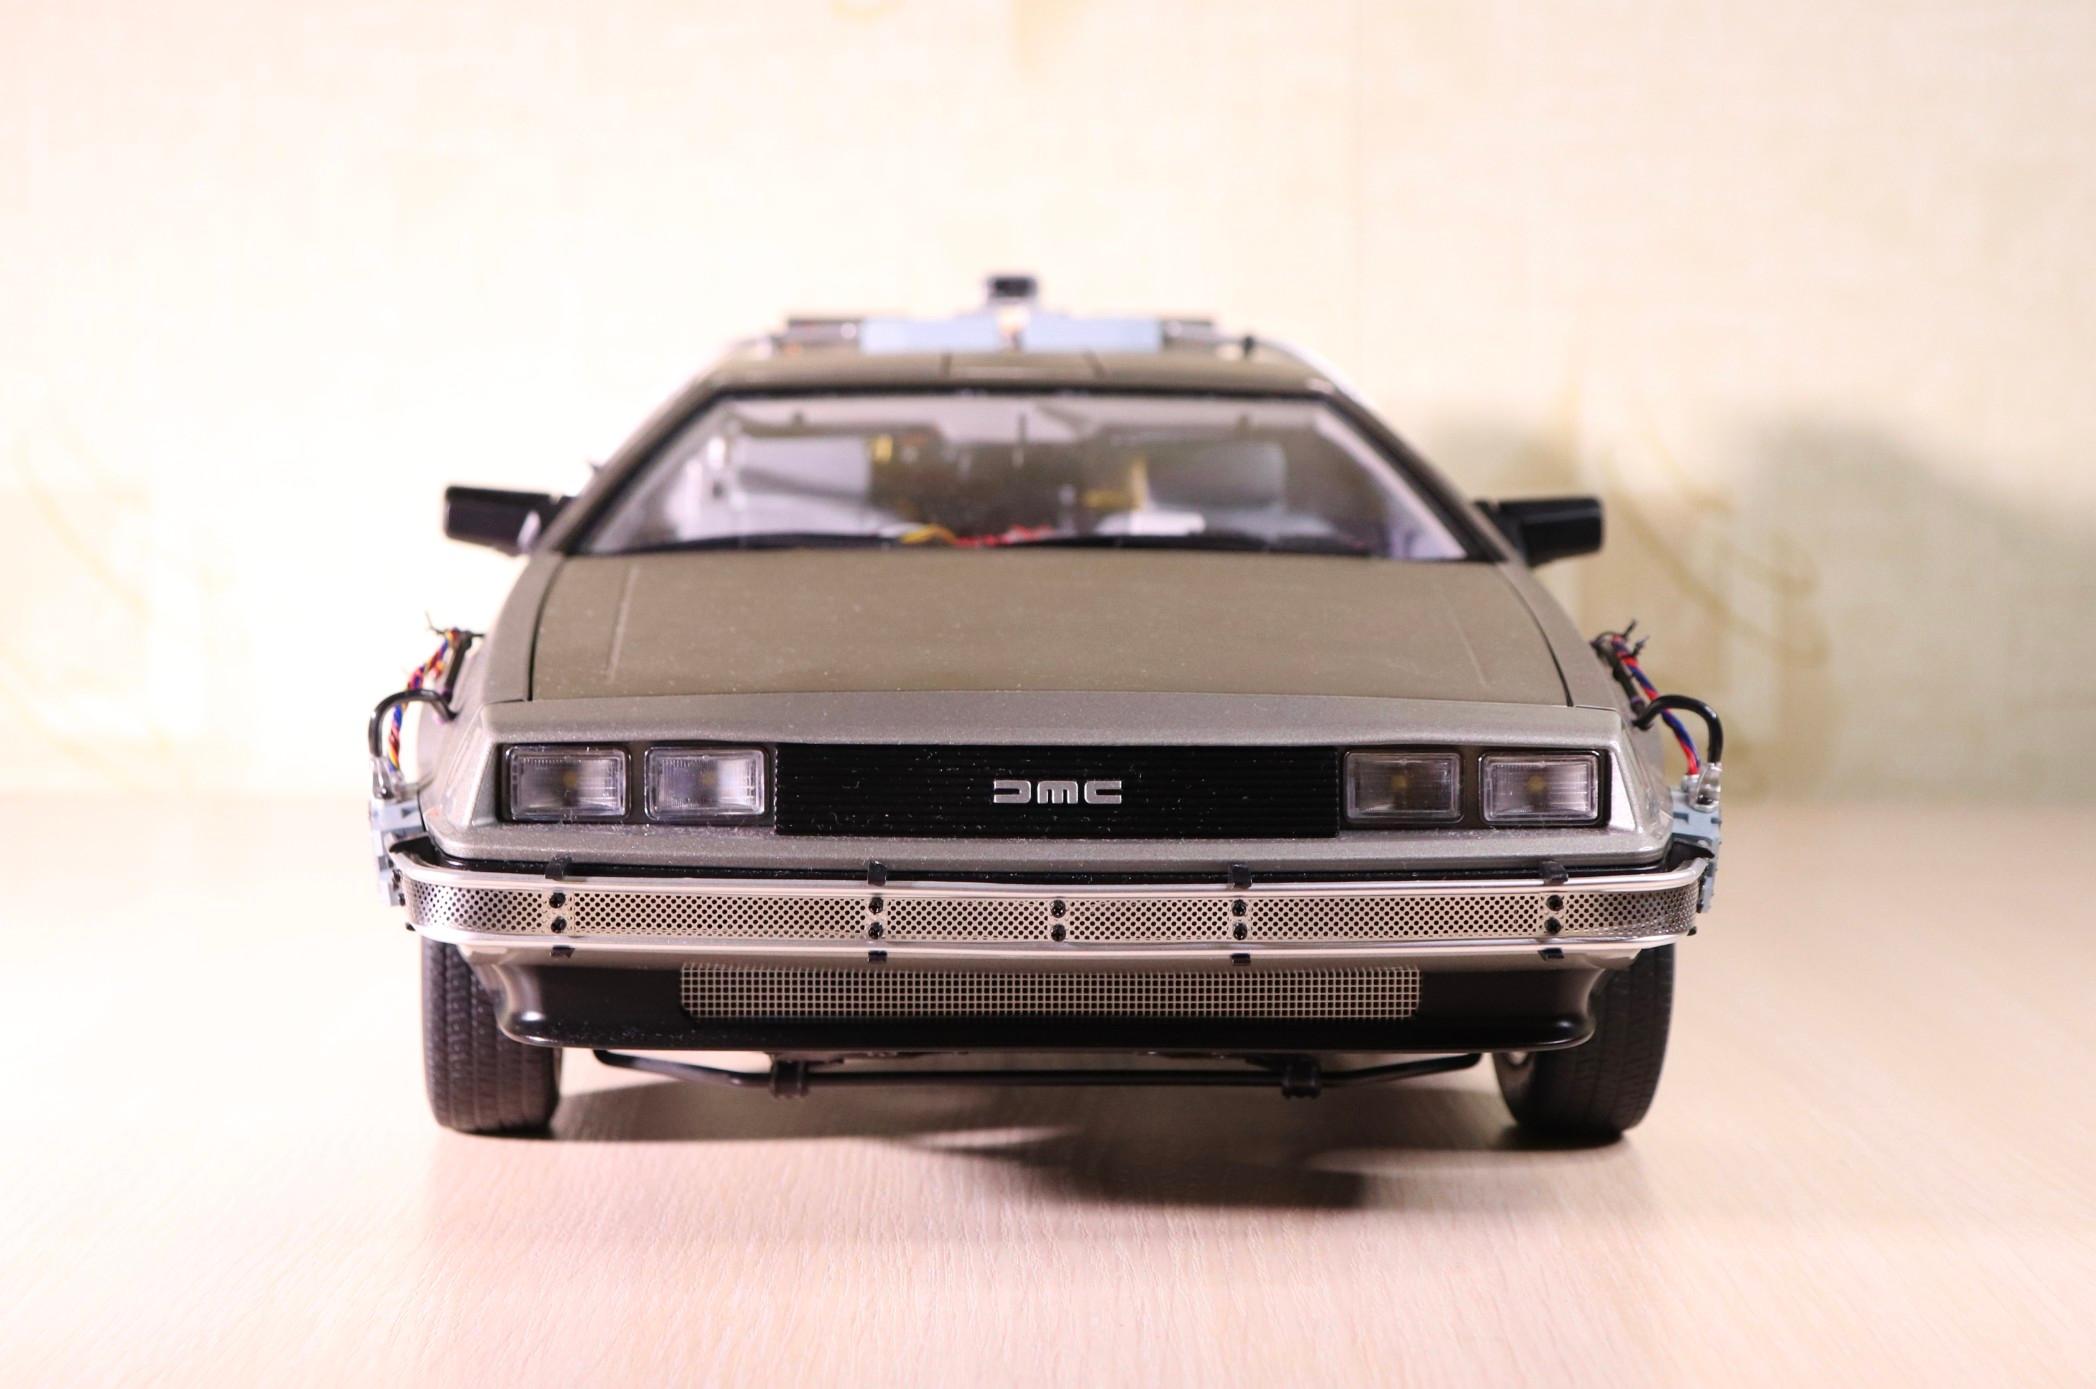 Enter Omaze’s sweepstakes contest, in support of the Petersen Automotive Museum, for the chance to win a DeLorean.